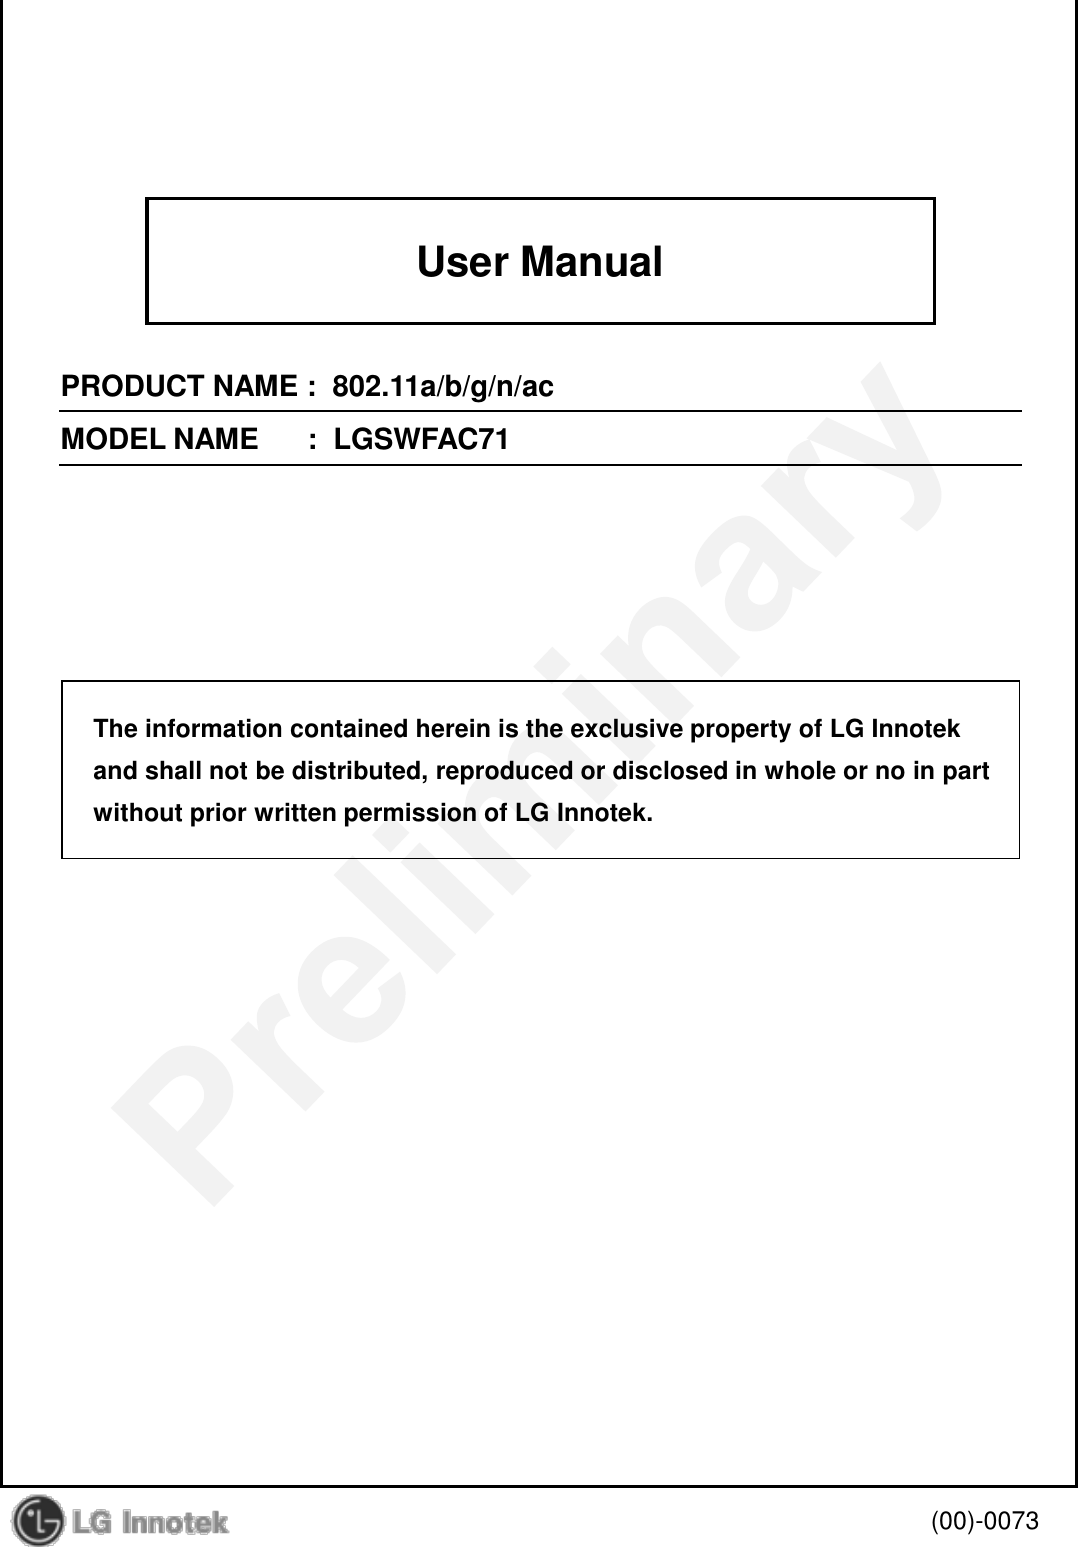 User ManualPRODUCT NAME :  802.11a/b/g/n/ac MODEL NAME      :  LGSWFAC71(00)-0073The information contained herein is the exclusive property of LG Innotekand shall not be distributed, reproduced or disclosed in whole or no in partwithout prior written permission of LG Innotek.